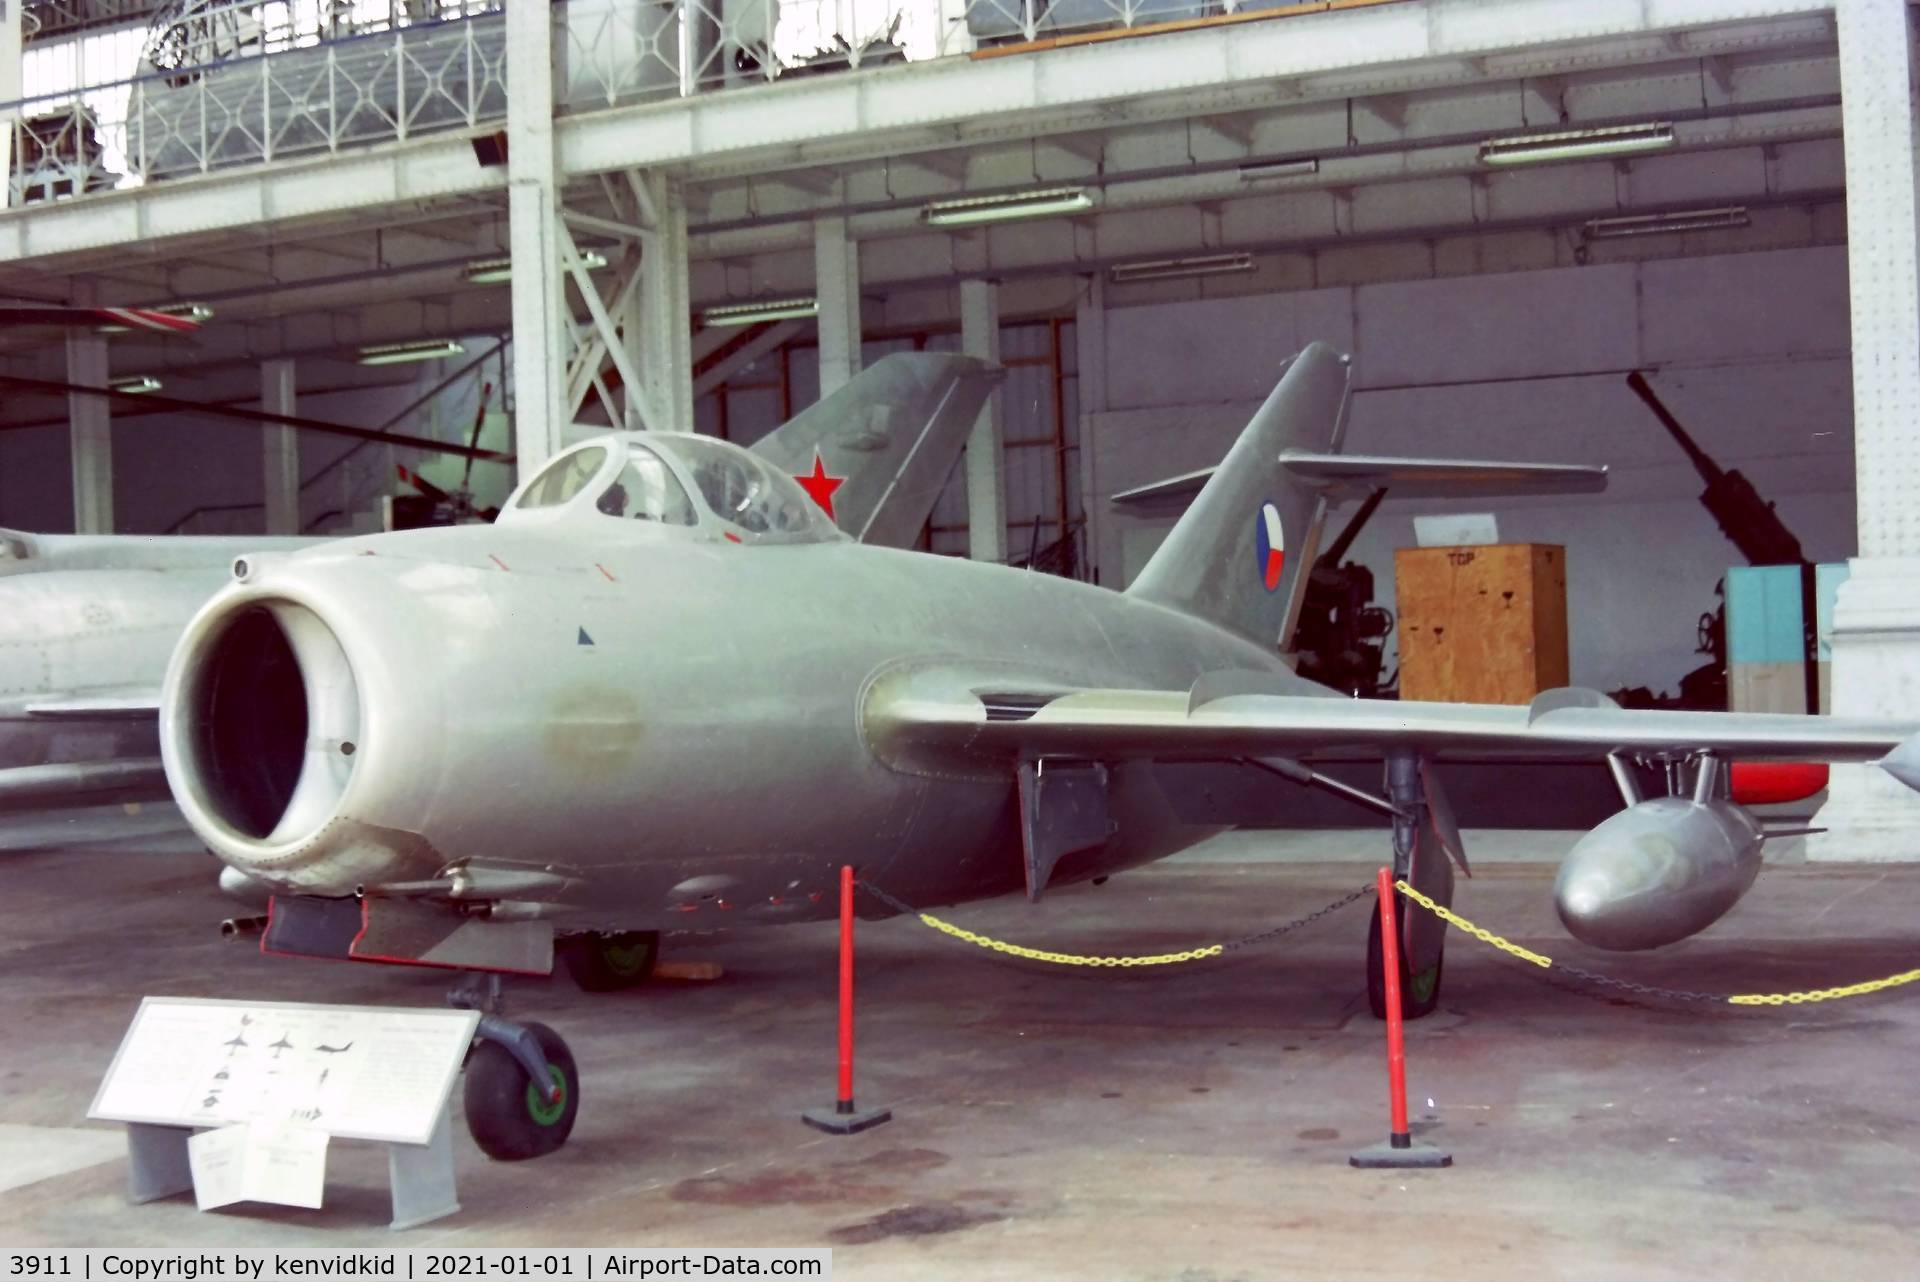 3911, Mikoyan-Gurevich MiG-15bis C/N 623911, At the Brussels Aviation Museum in 2000.